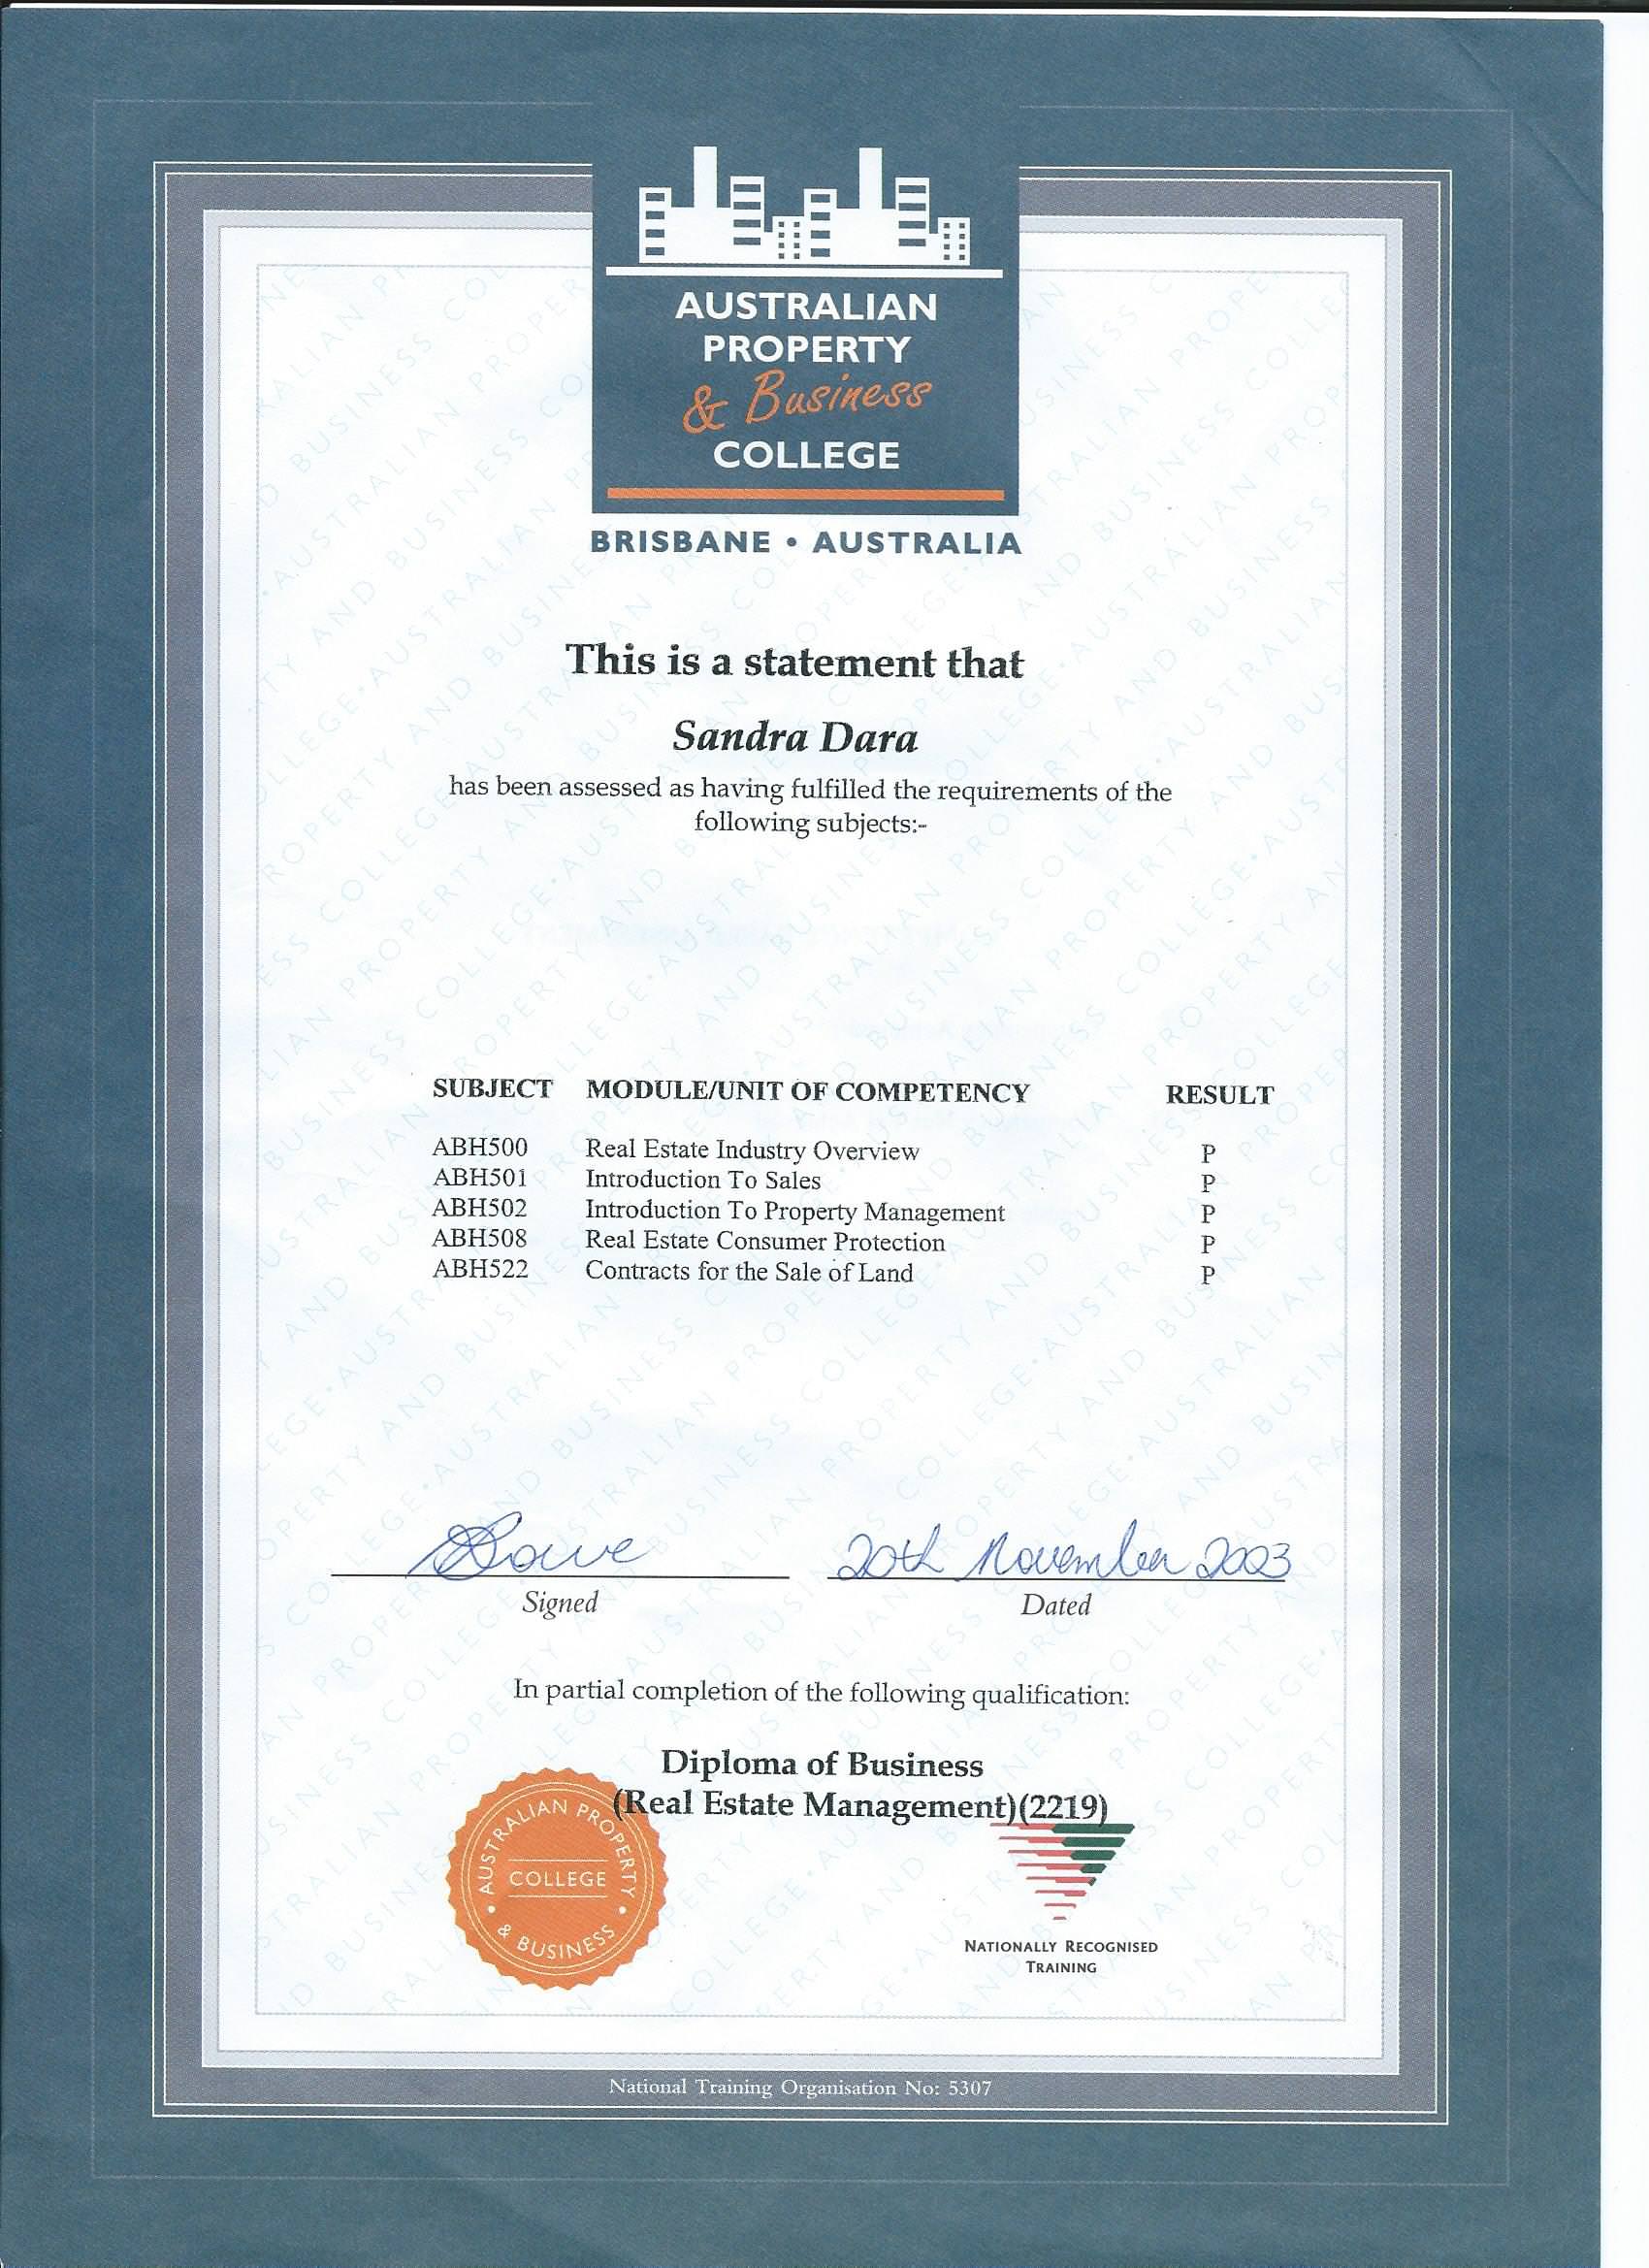 Diploma of Business (Real Estate Management)